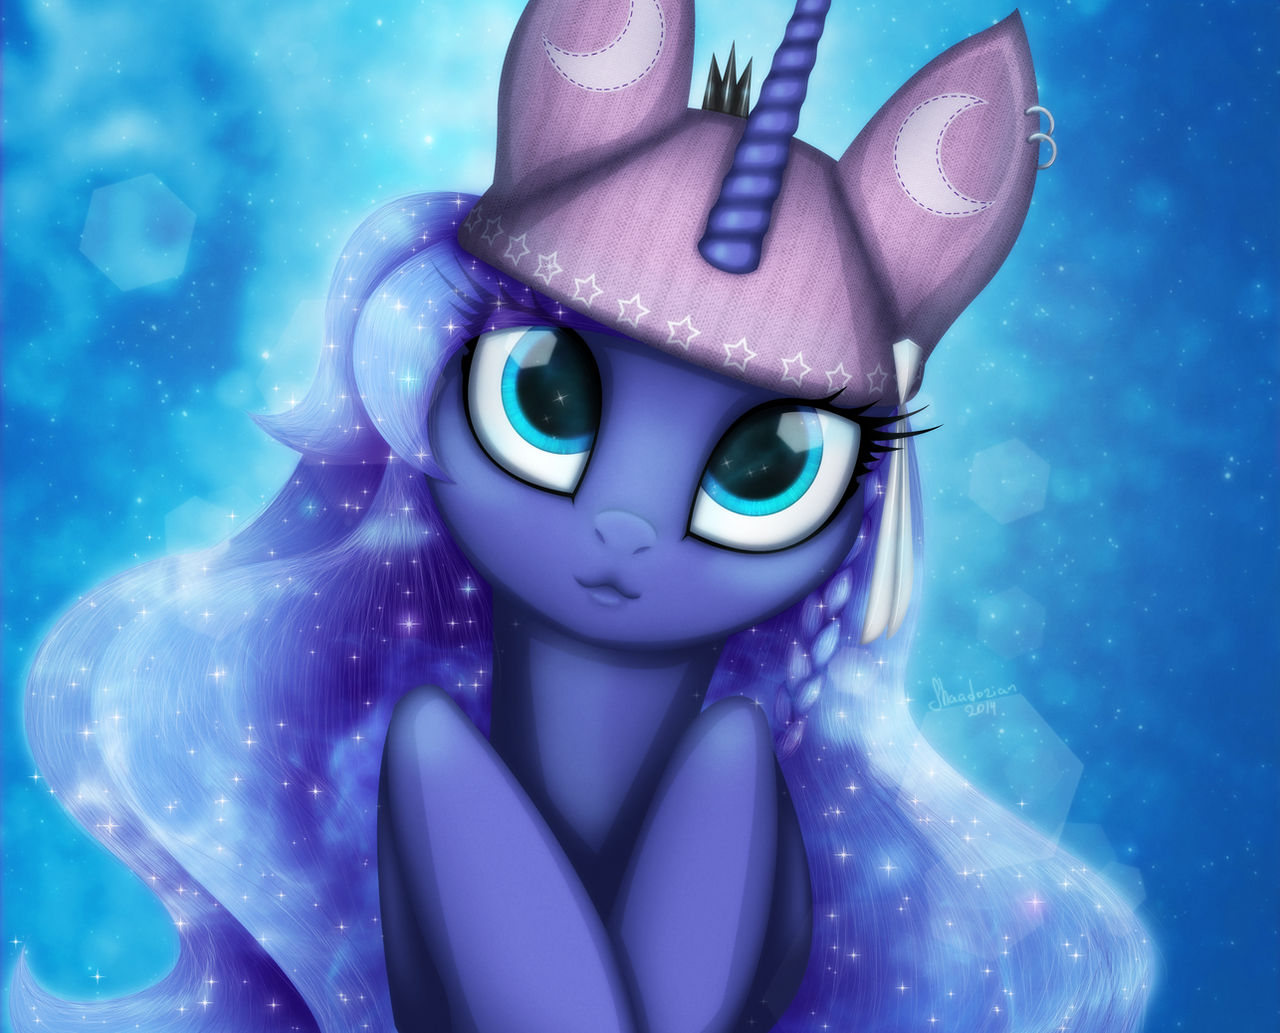 Woona in the hat